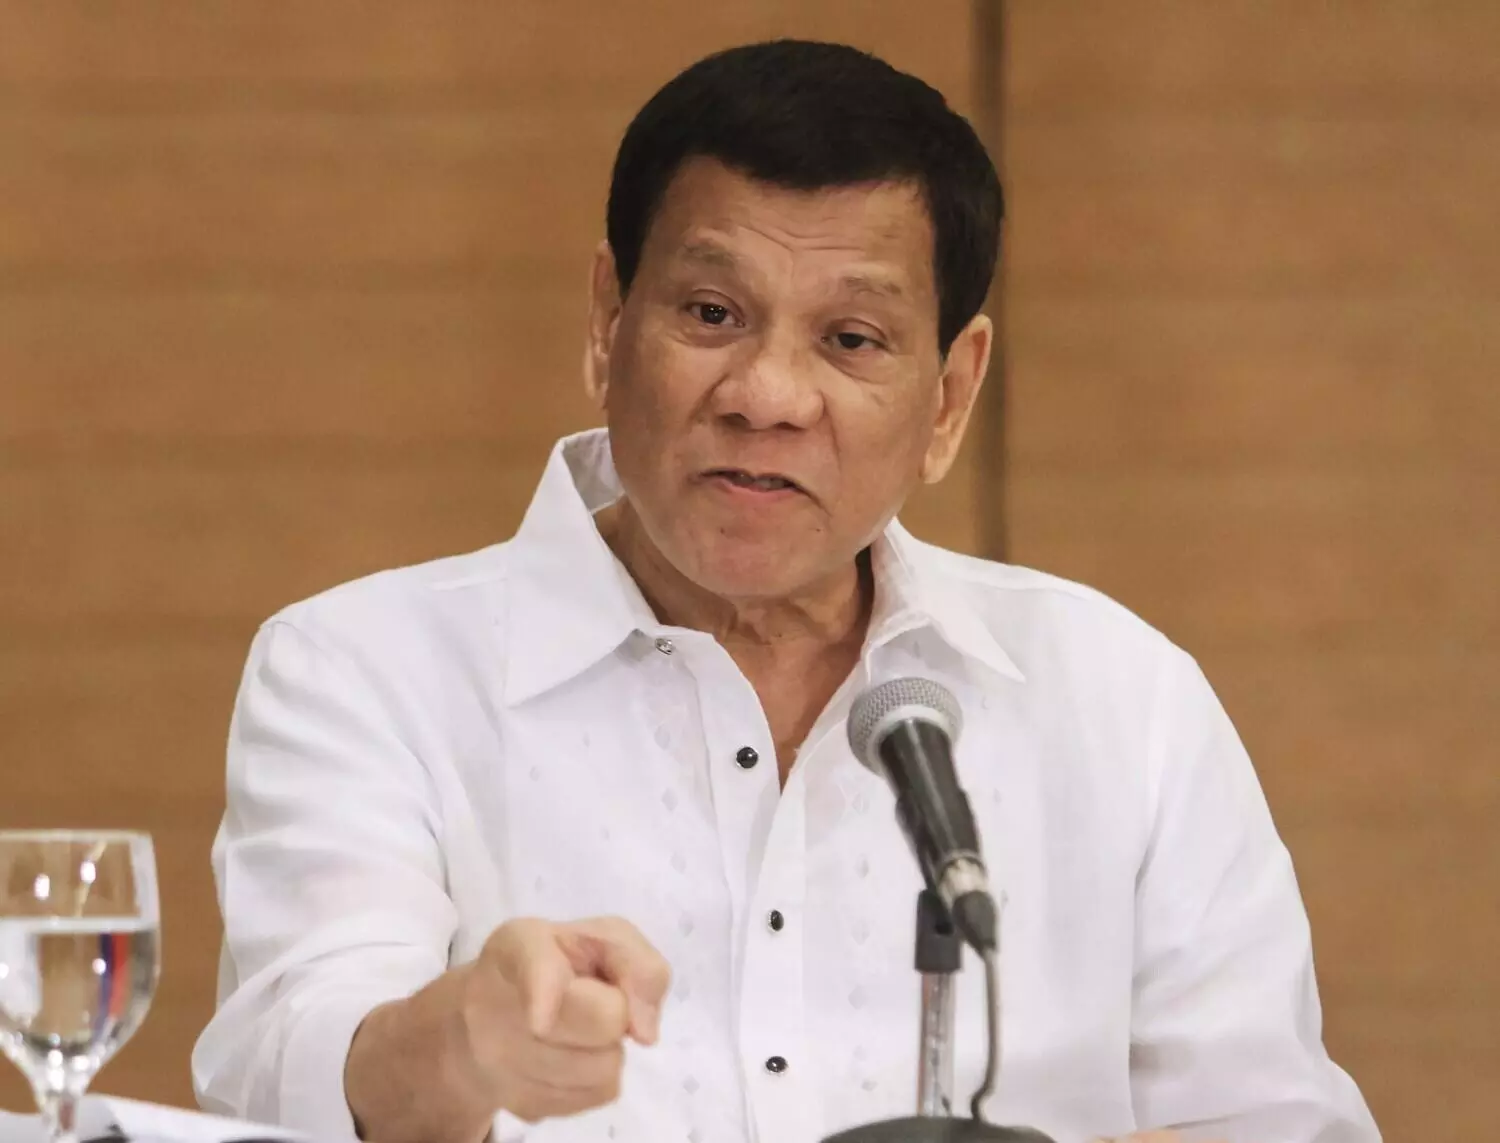 Video Of Philippine President Dutertes Speech Edited To Claim He Hurled Abuses At Xi Jinping